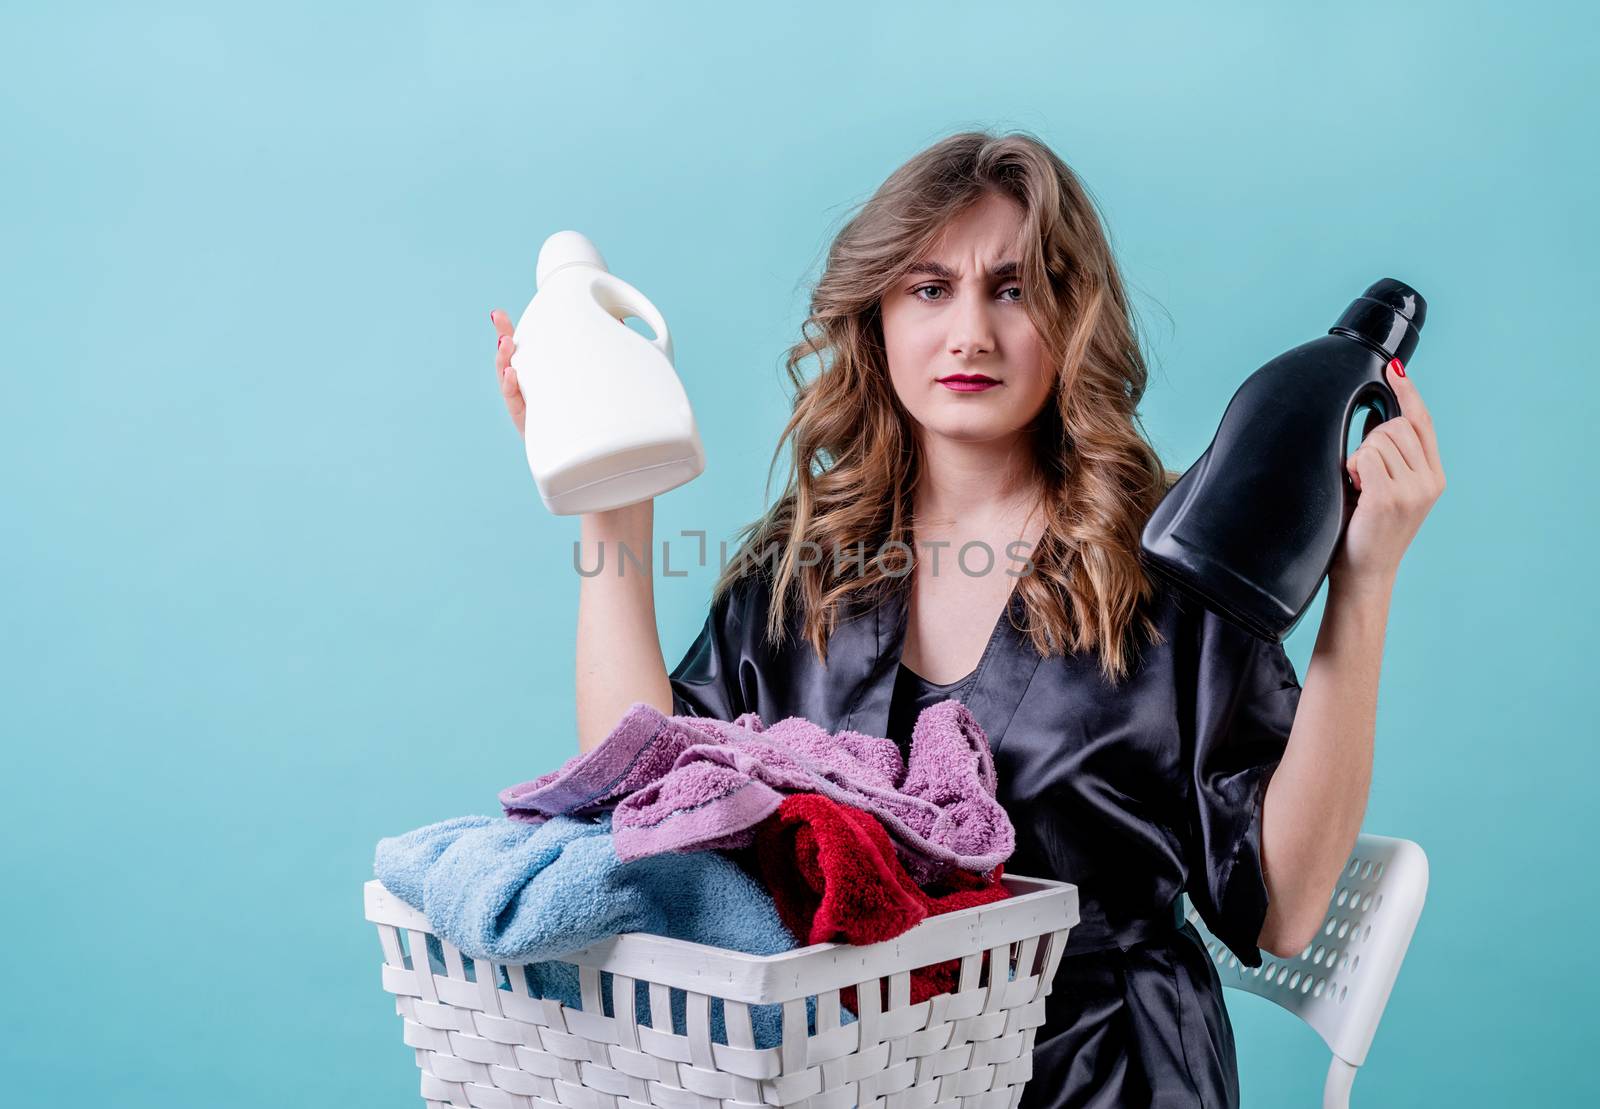 Laundry concept. puzzled housewife holding a basket of clothes and detergent bottles ready for laundry isolated on blue background with copy space